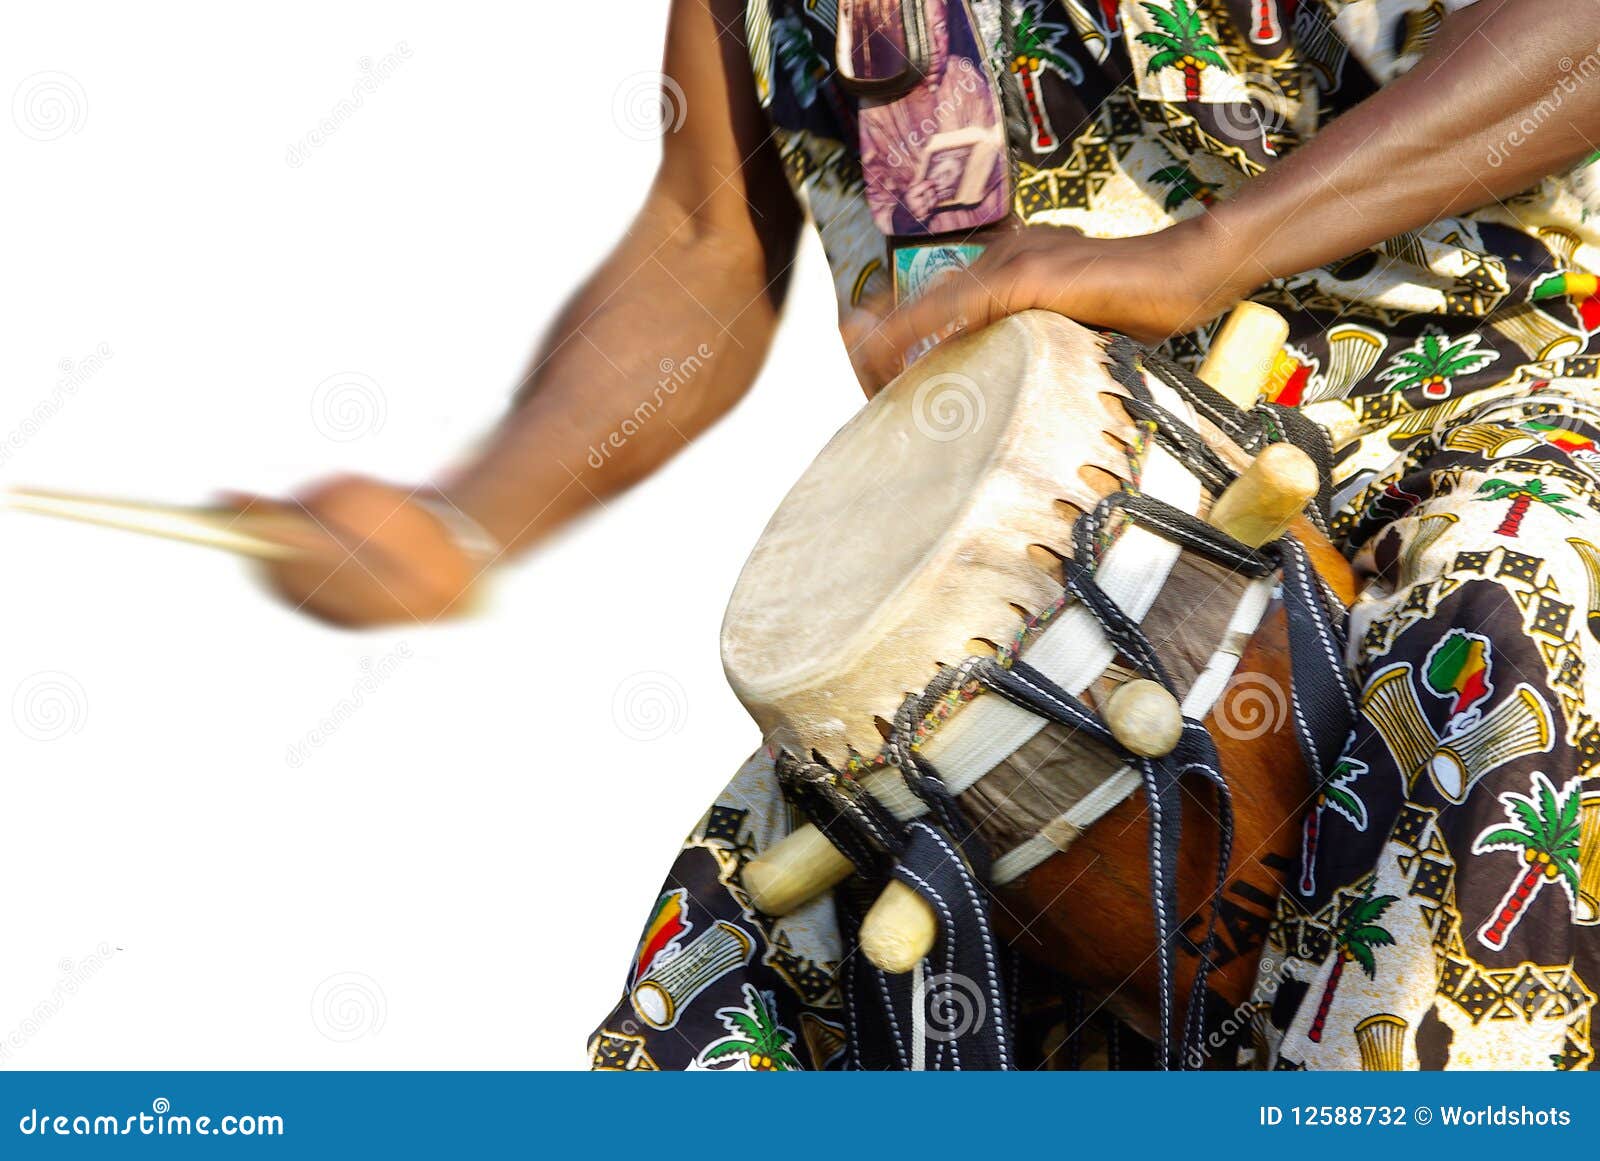 traditional african drum player